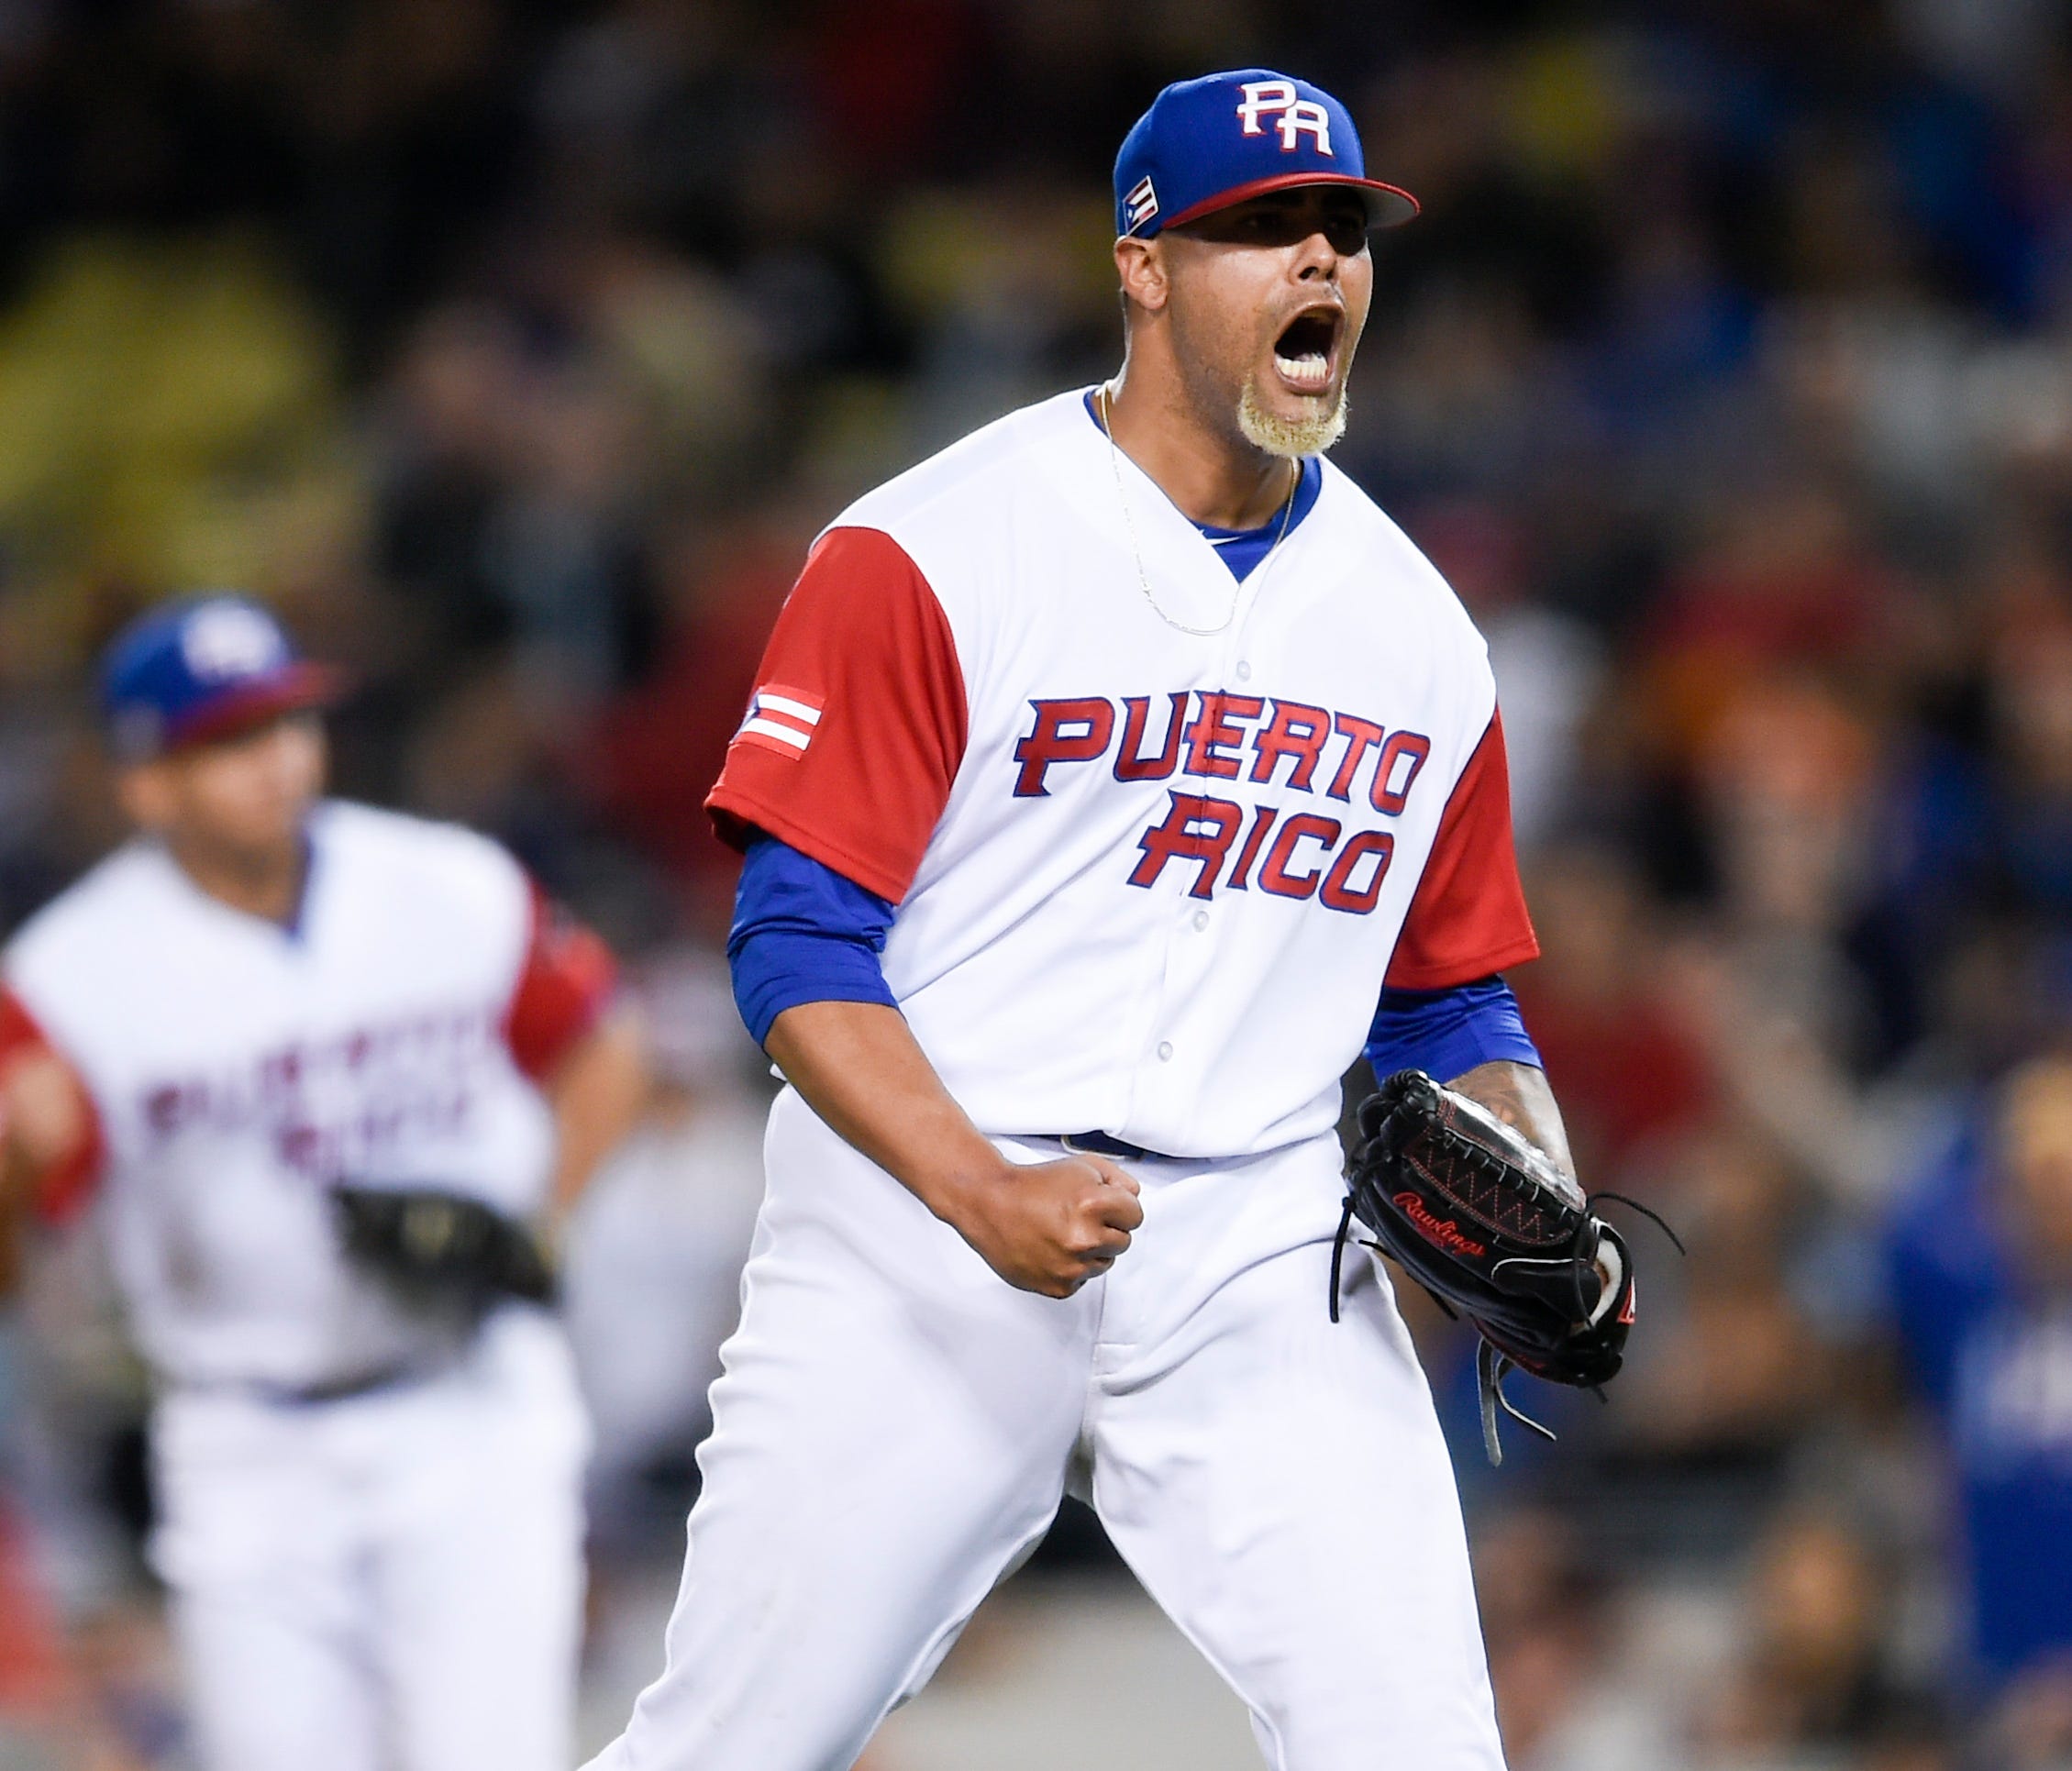 Joseph Colon exults after inducing an eighth-inning double play, part of a clutch relief effort from the Puerto Rico bullpen.